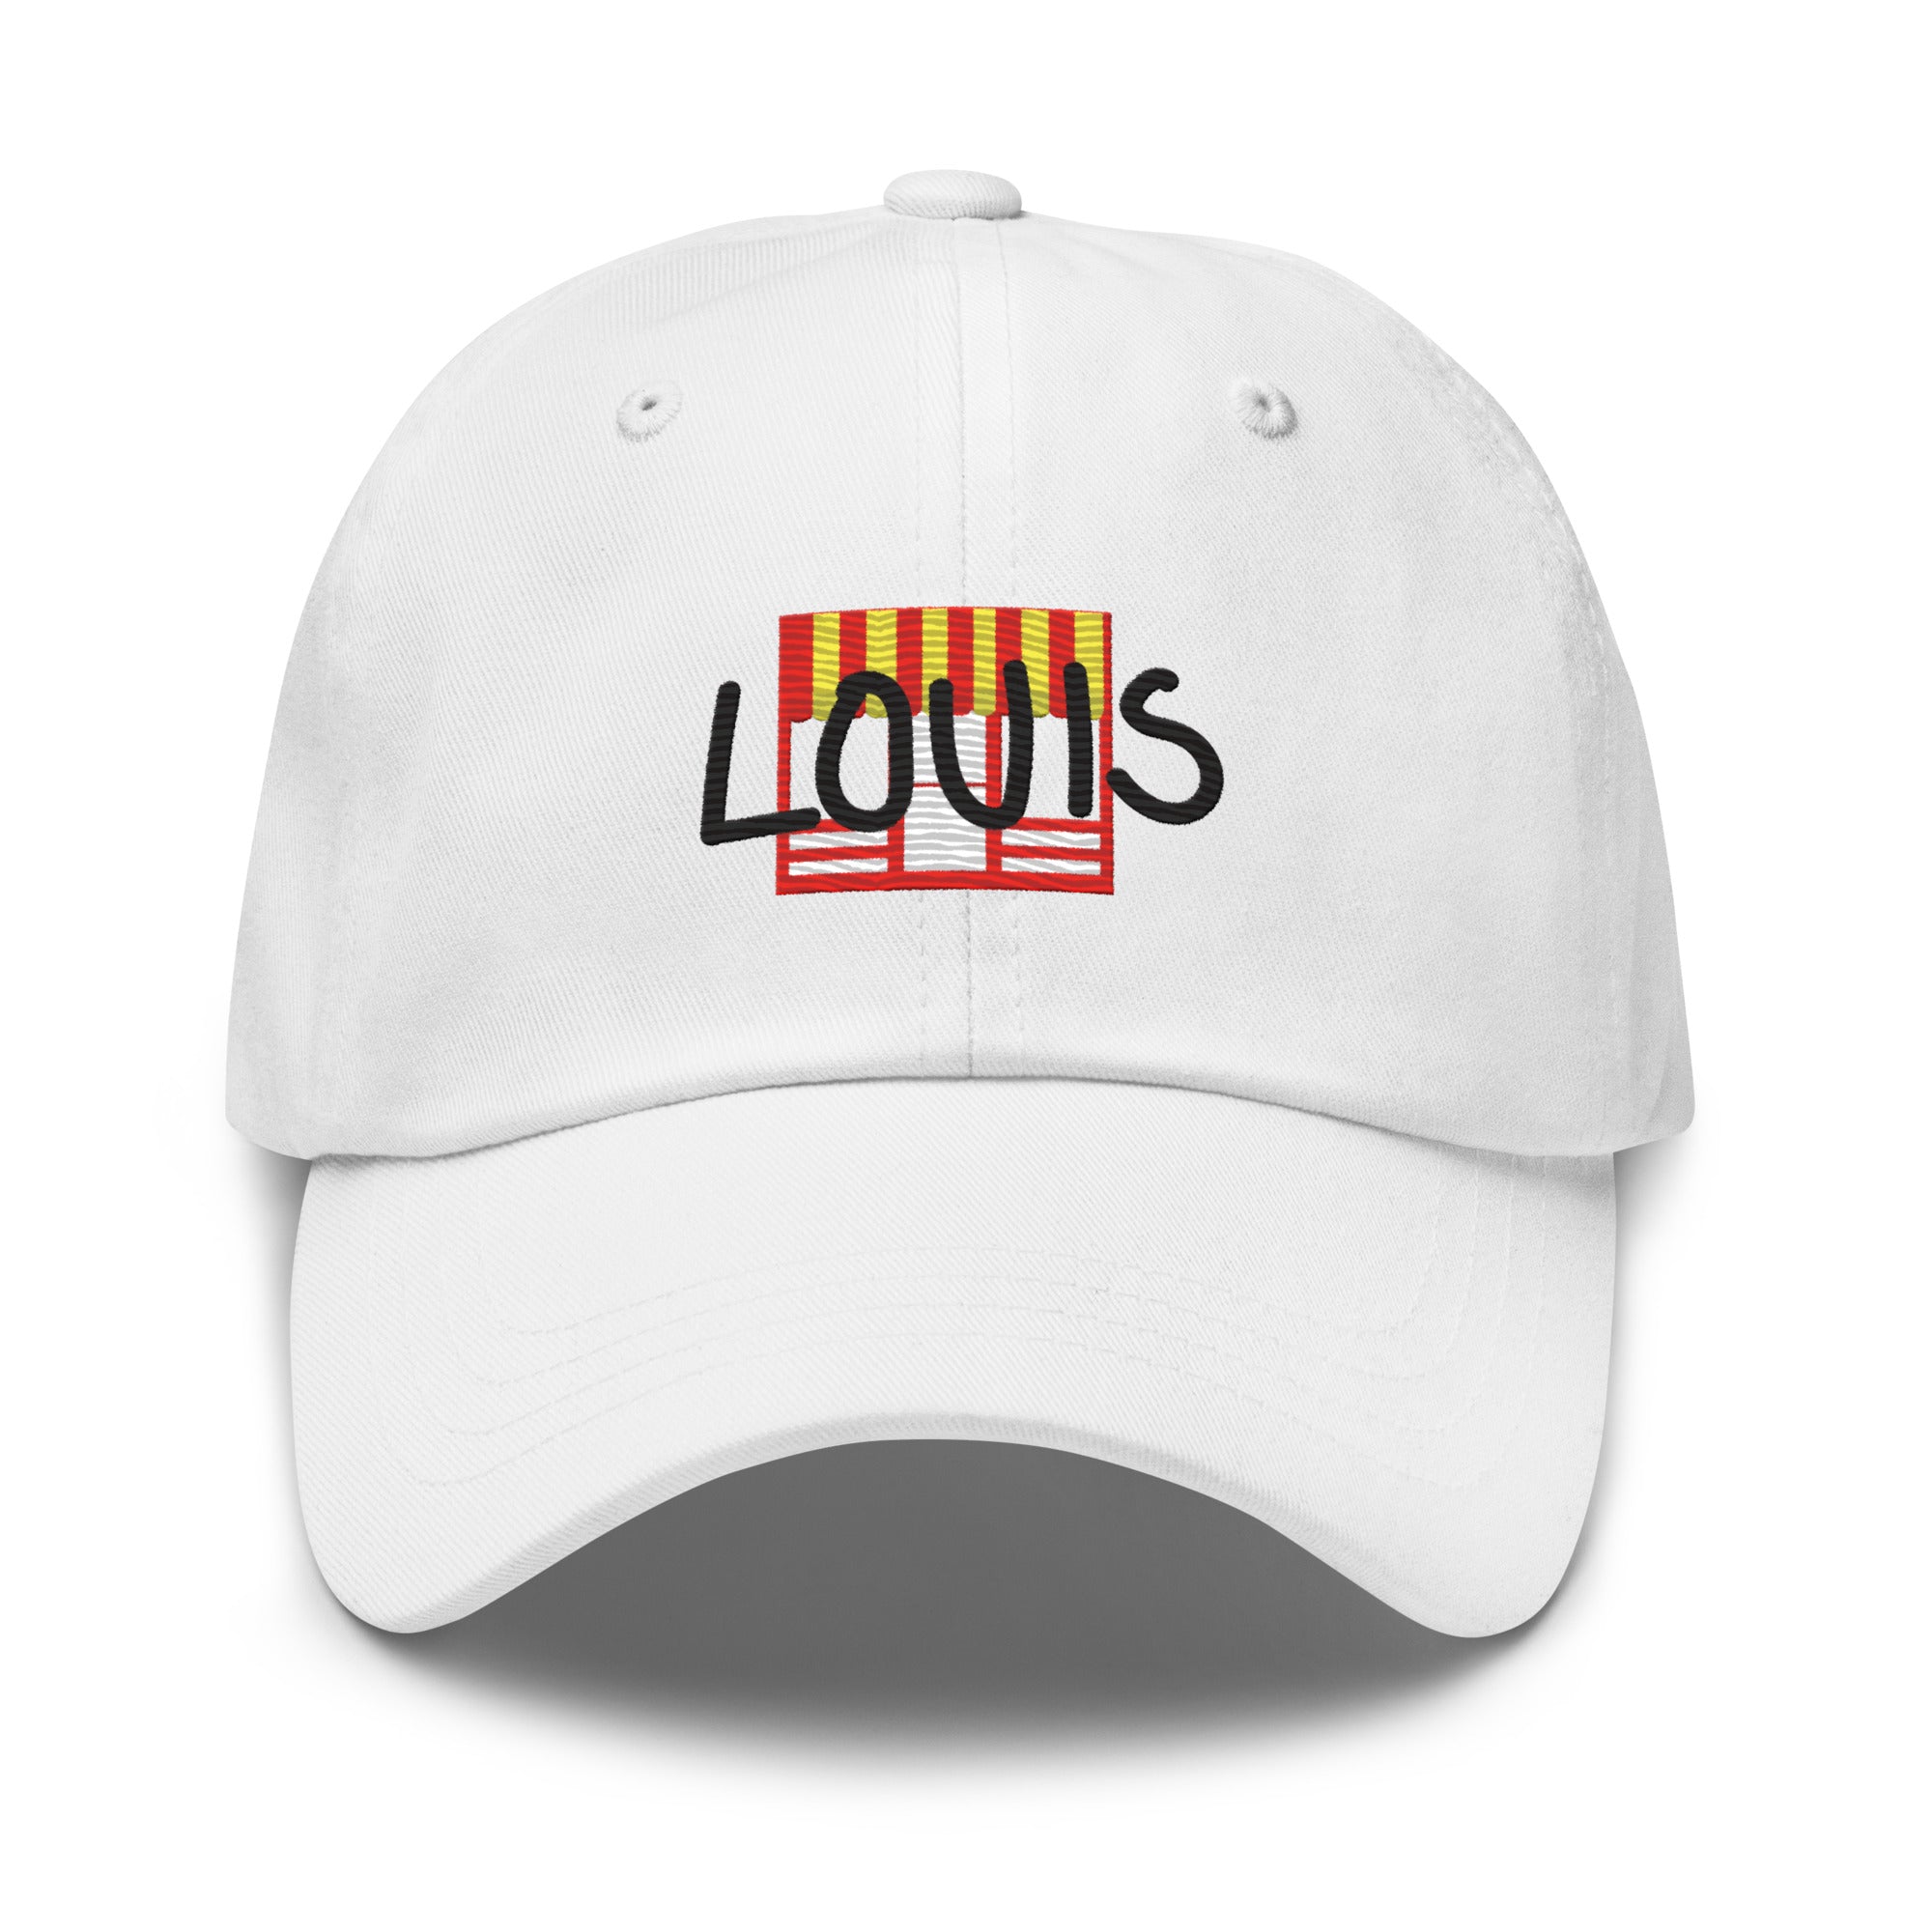 classic-dad-hat-white-front-64cfb3d872a80.jpg